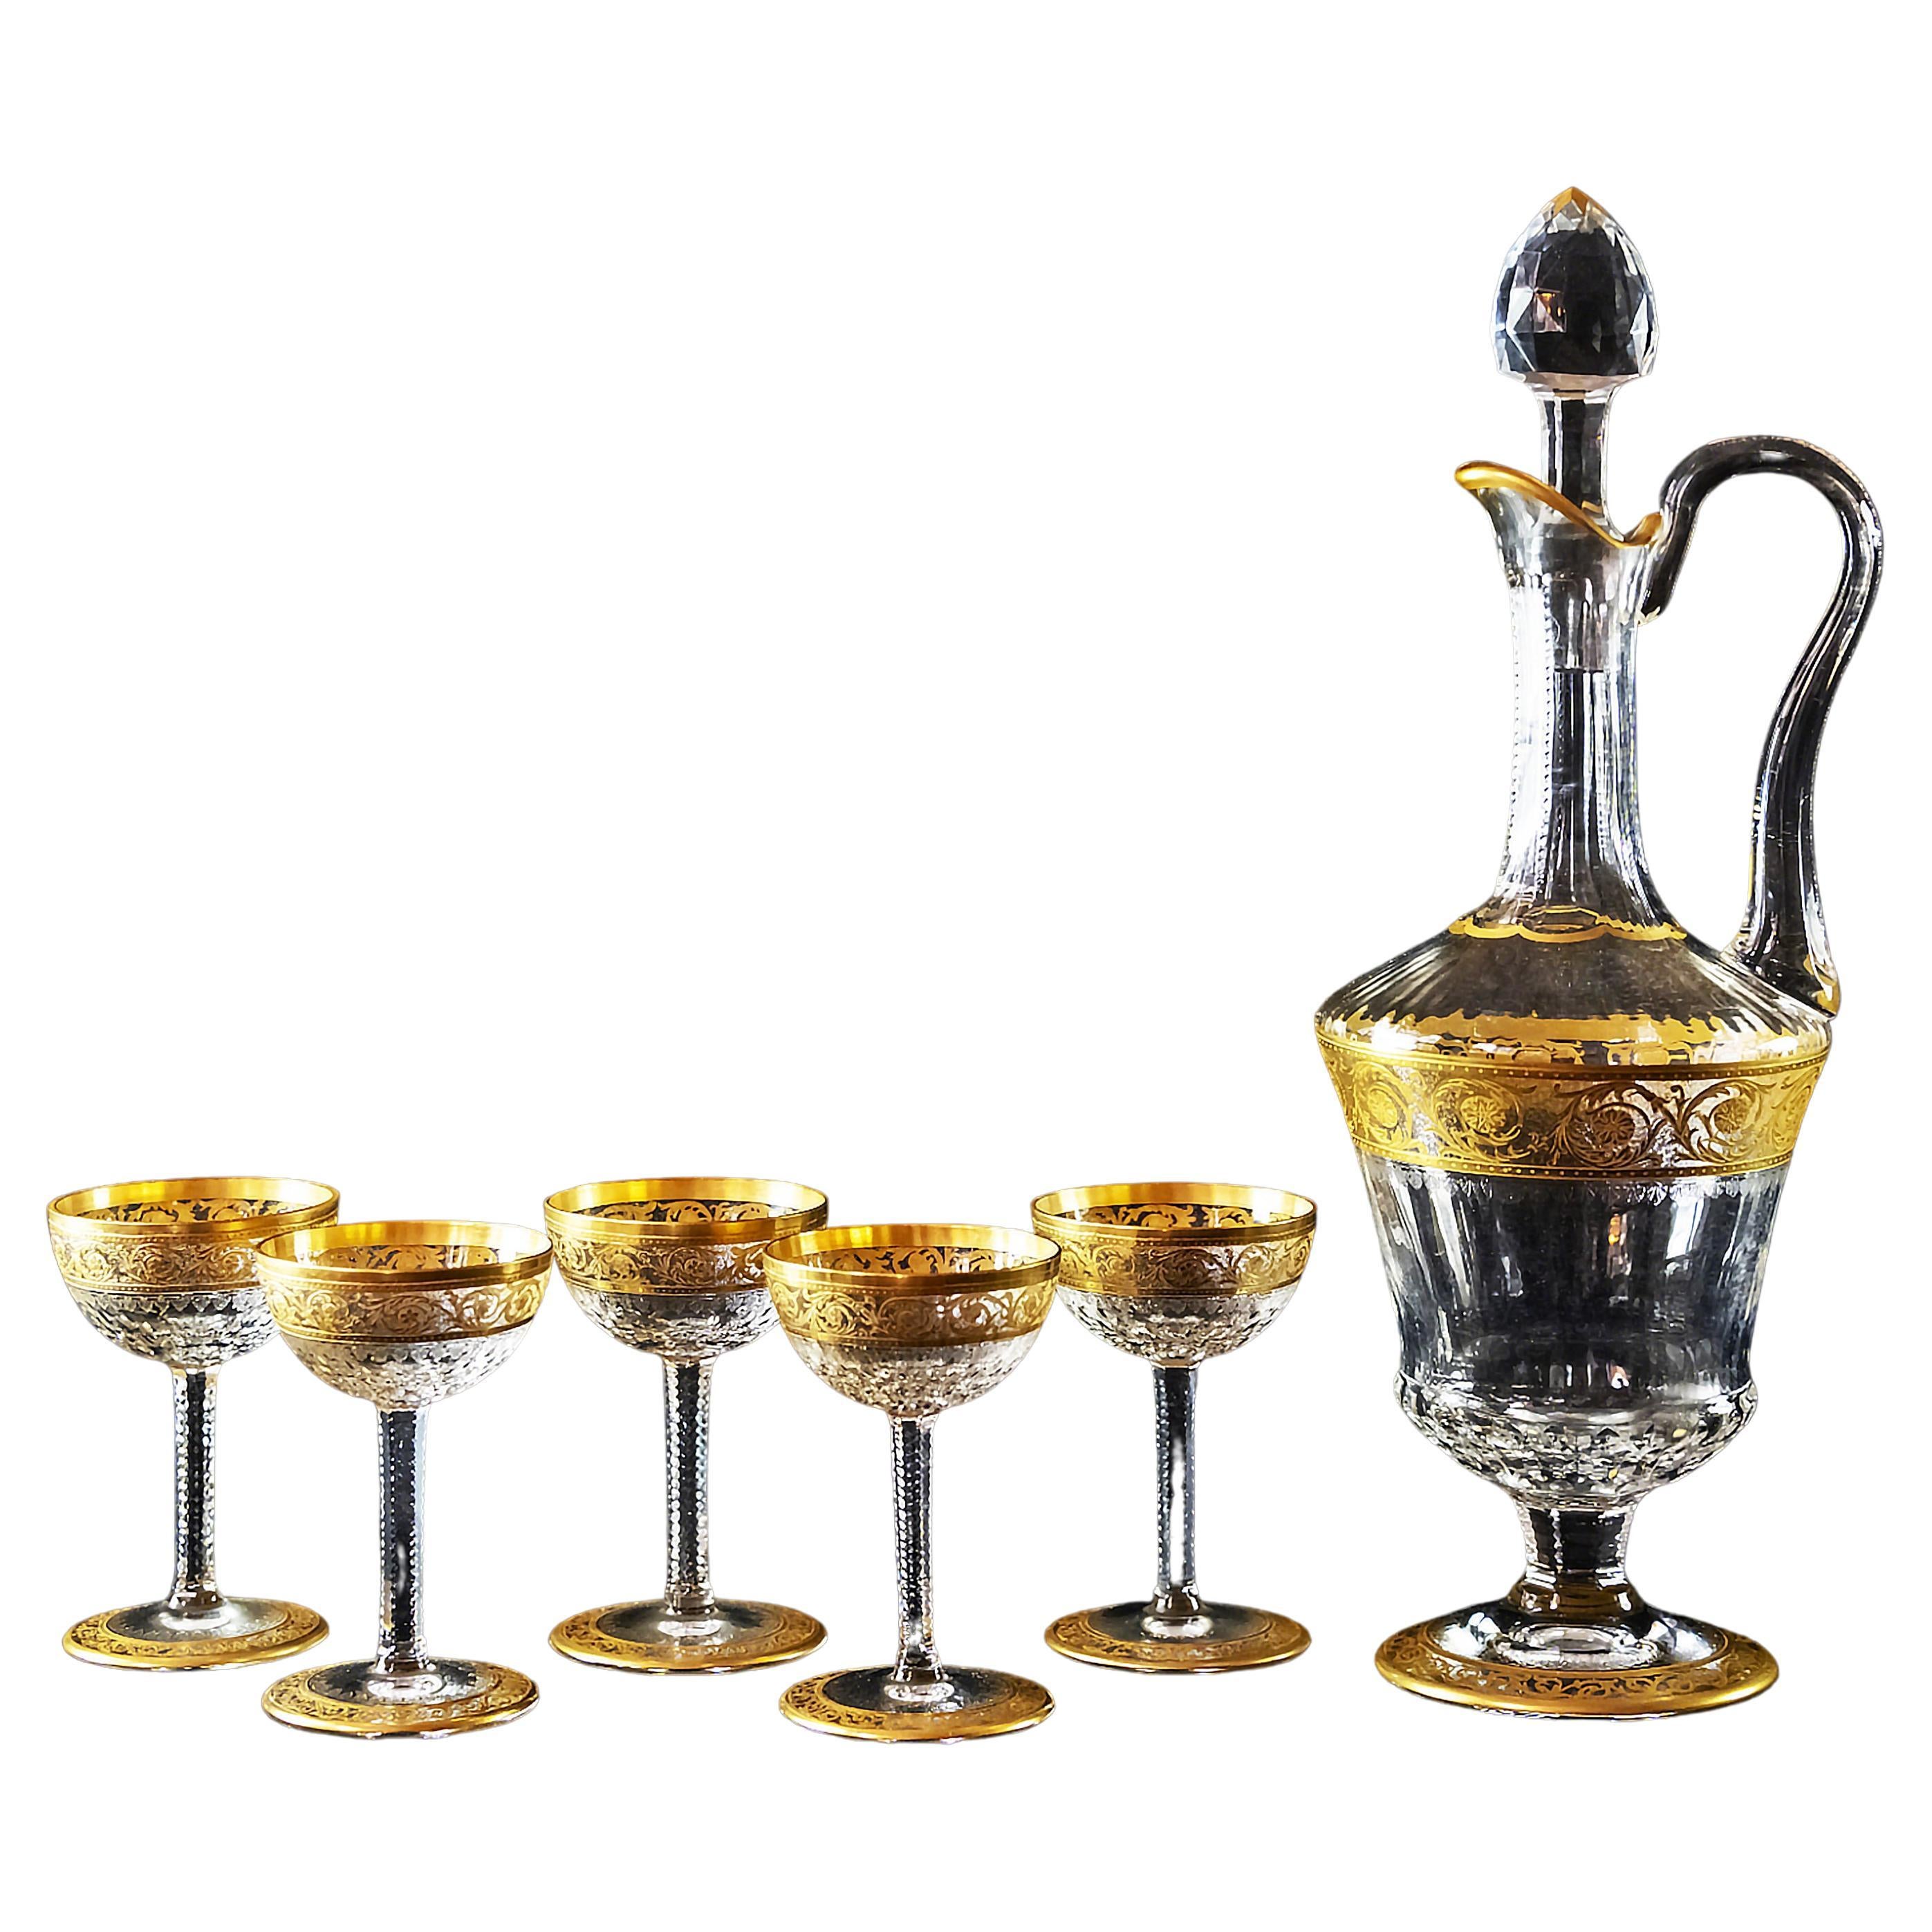 Set of 6 pcs. French Saint Louis Crystal Carafe with Sherry Glasses For Sale